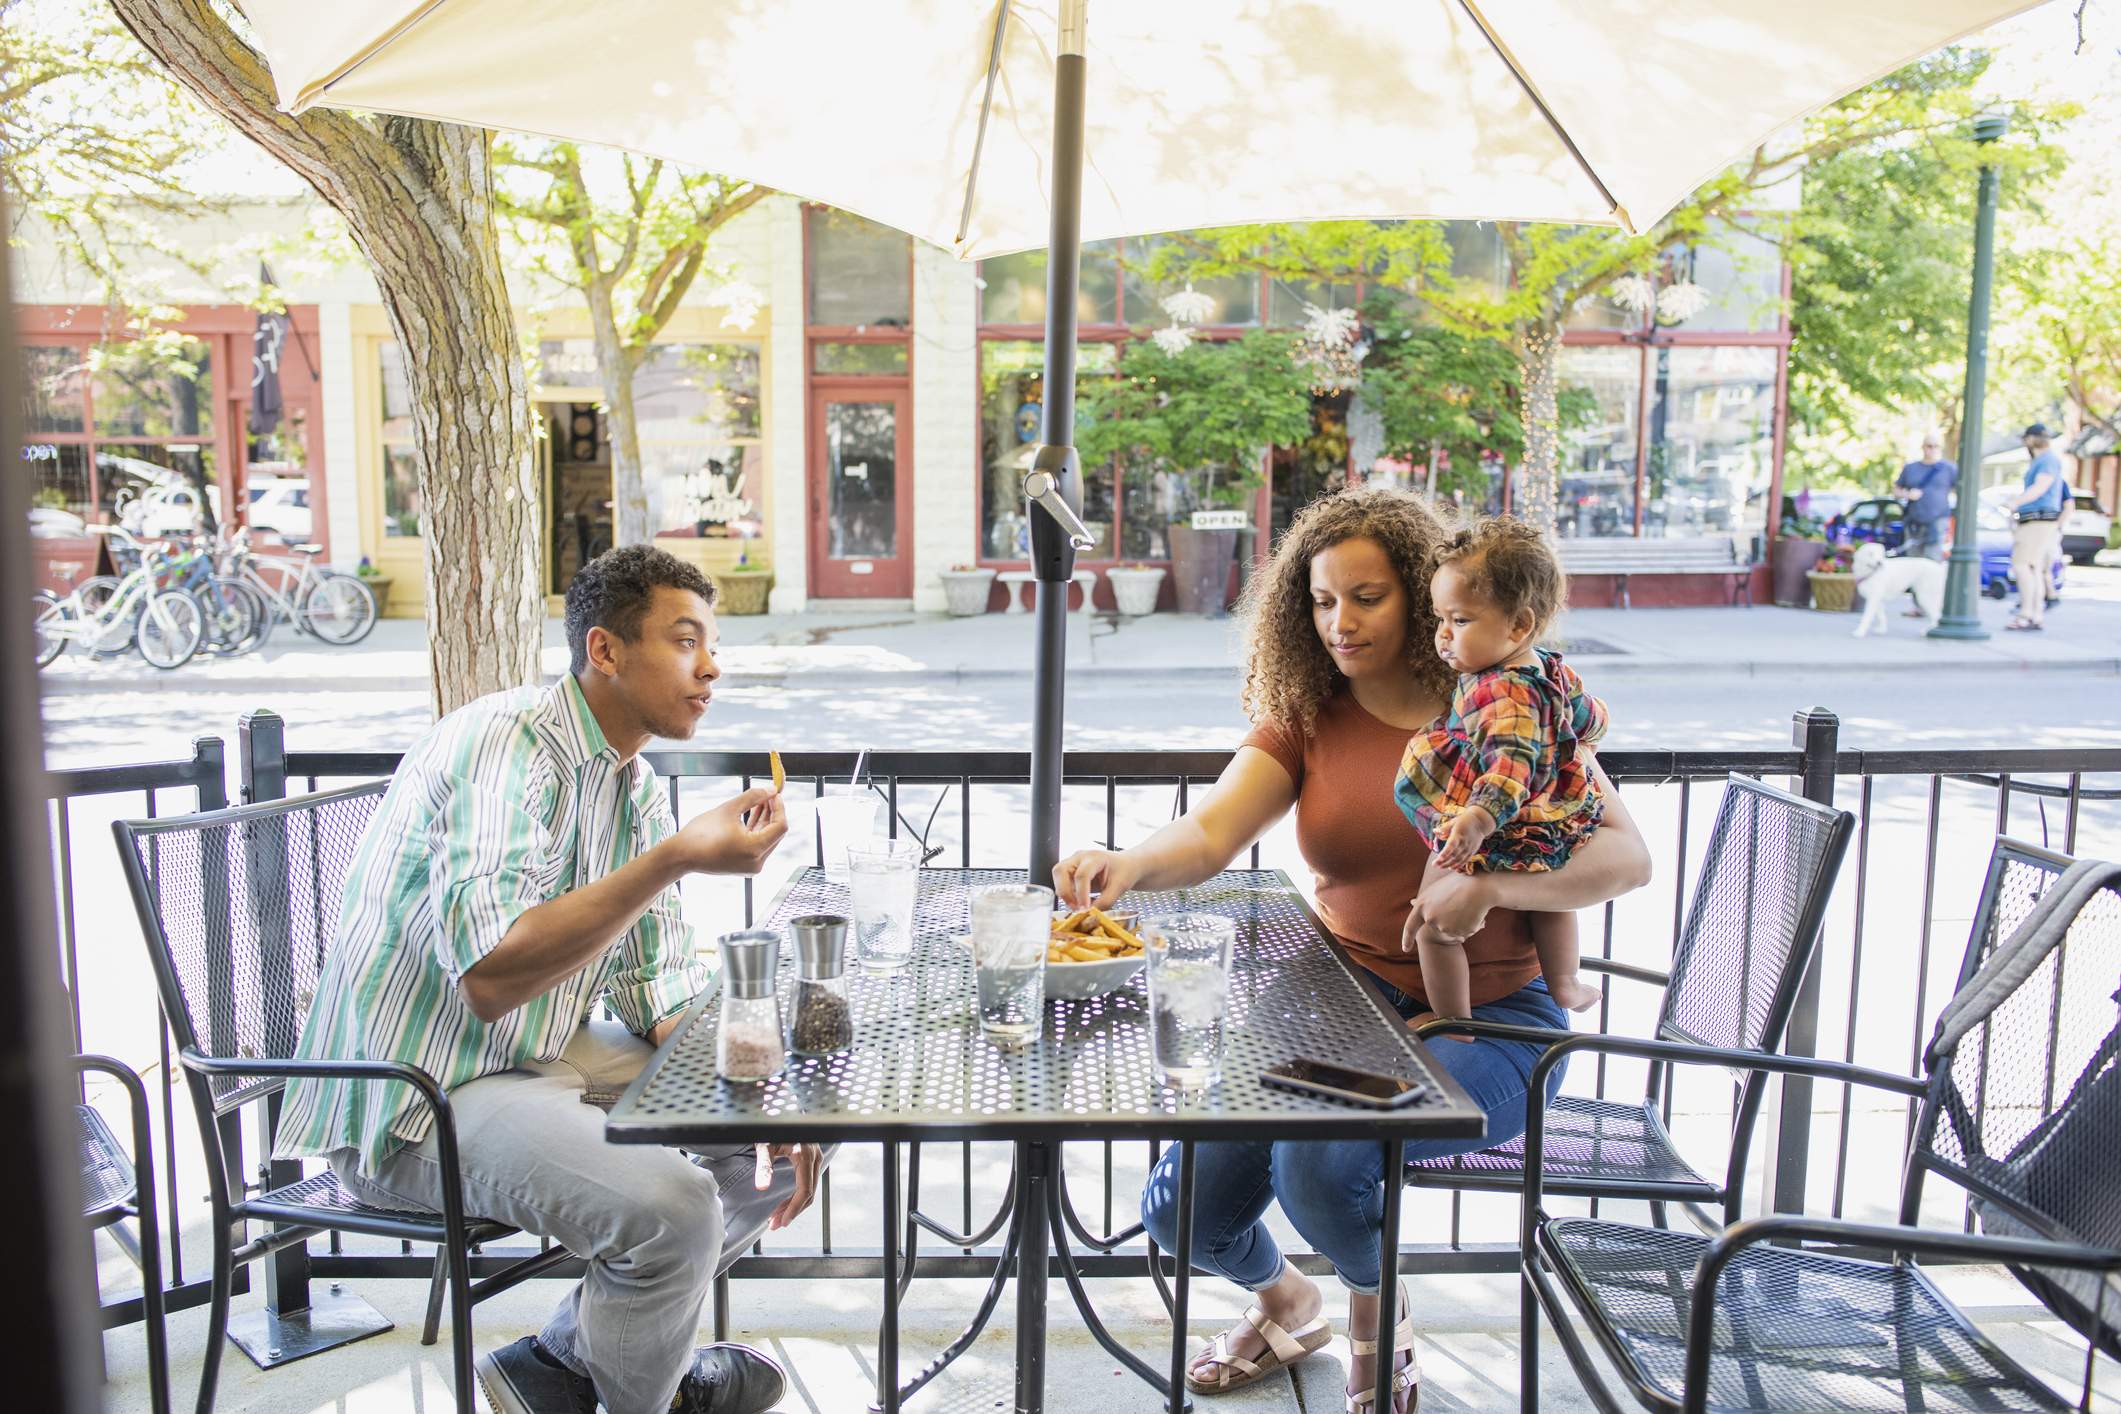 Image depicts a family sitting at an outdoor table eating french fries.